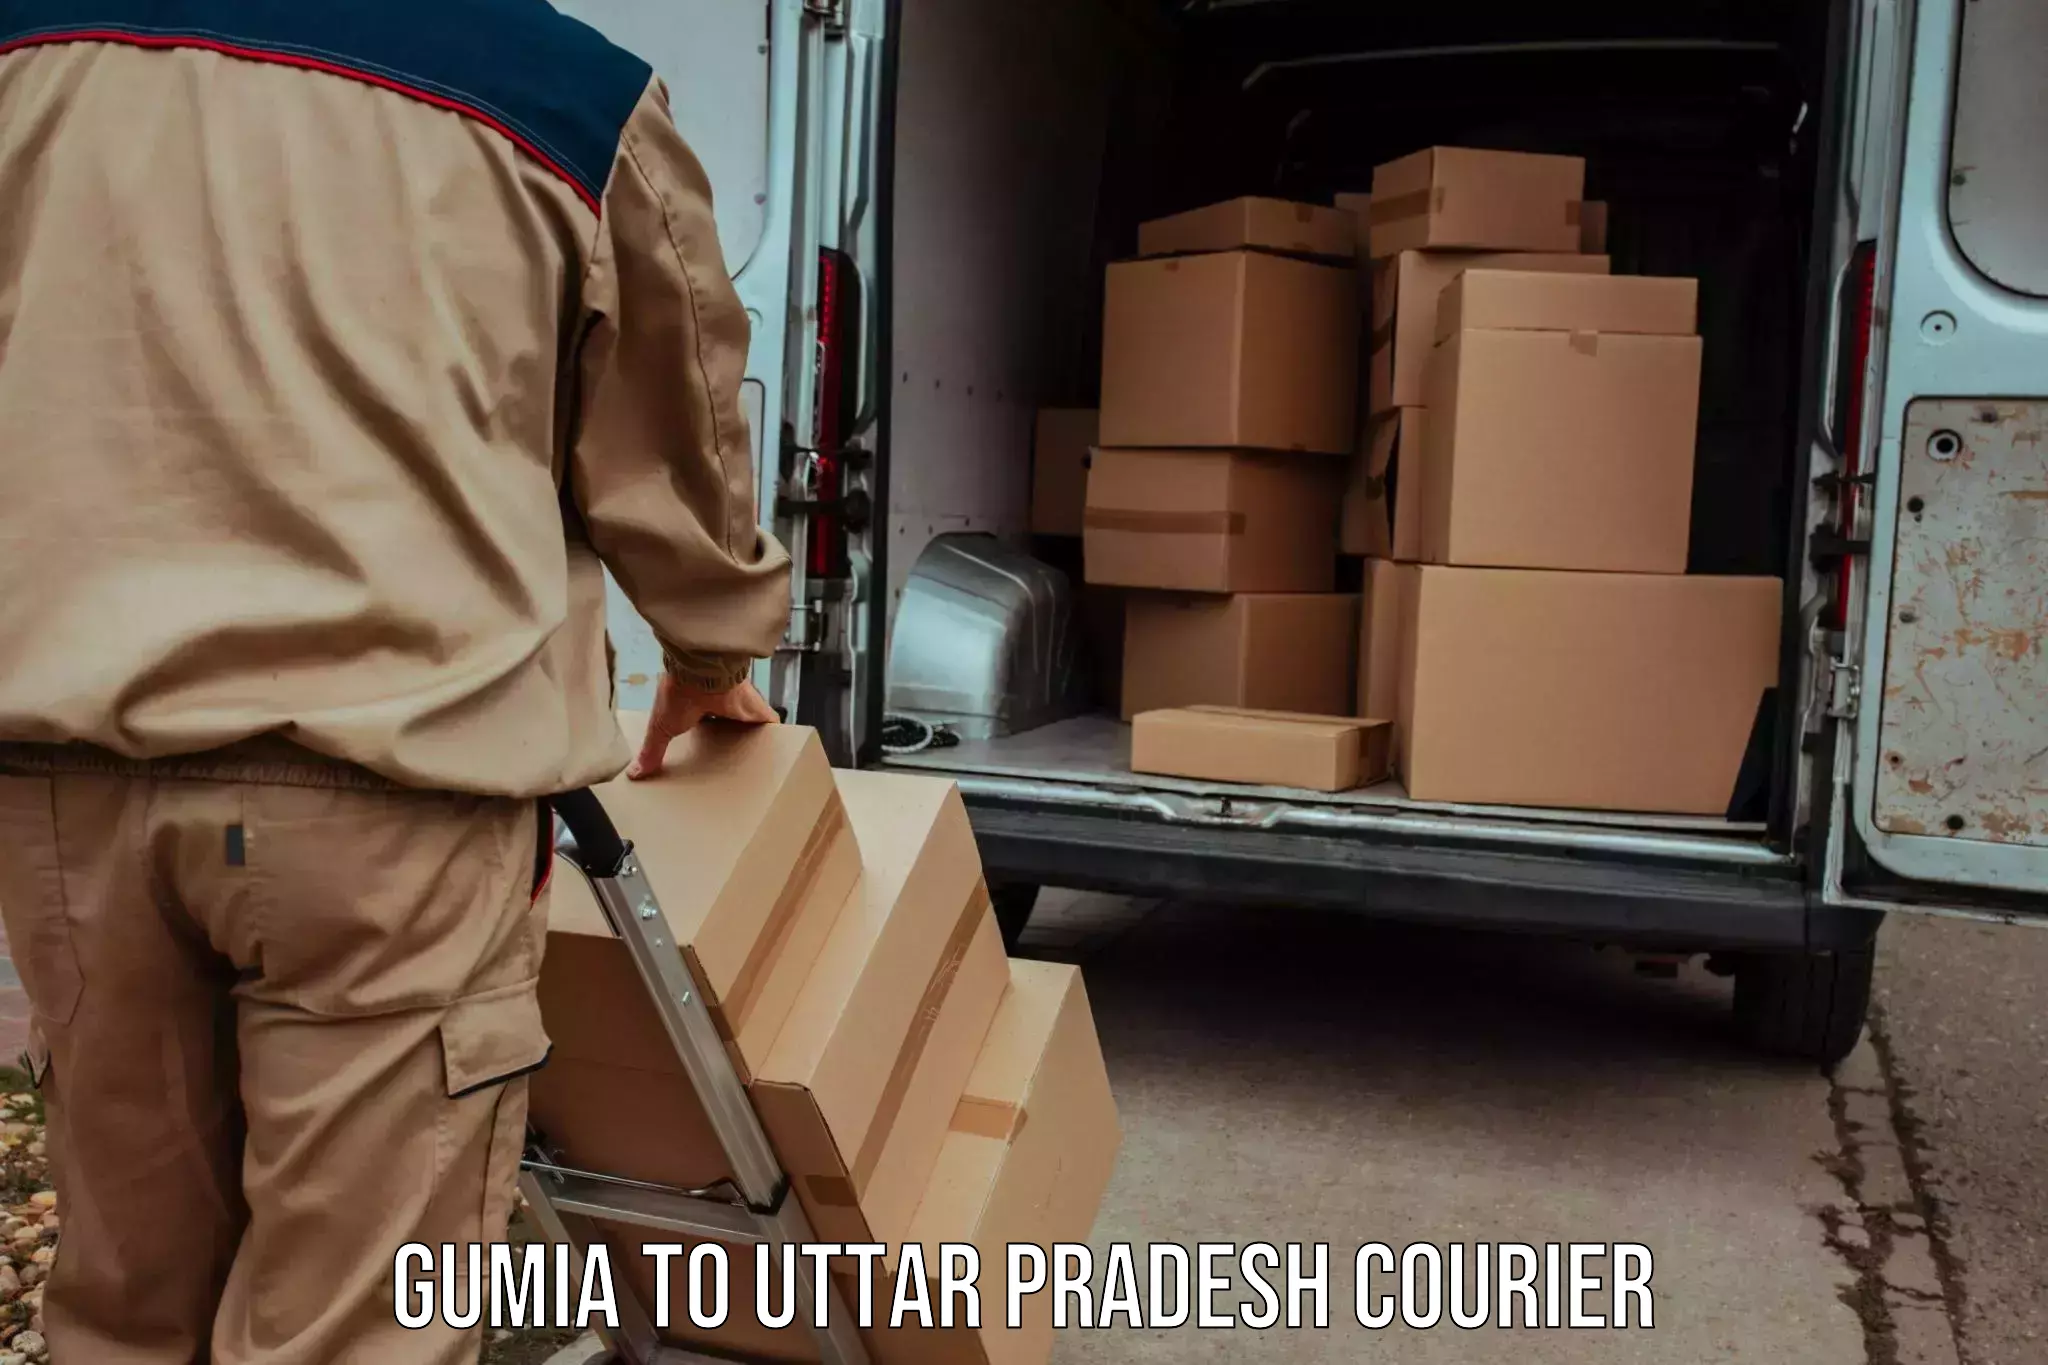 Nationwide courier service Gumia to Sadat